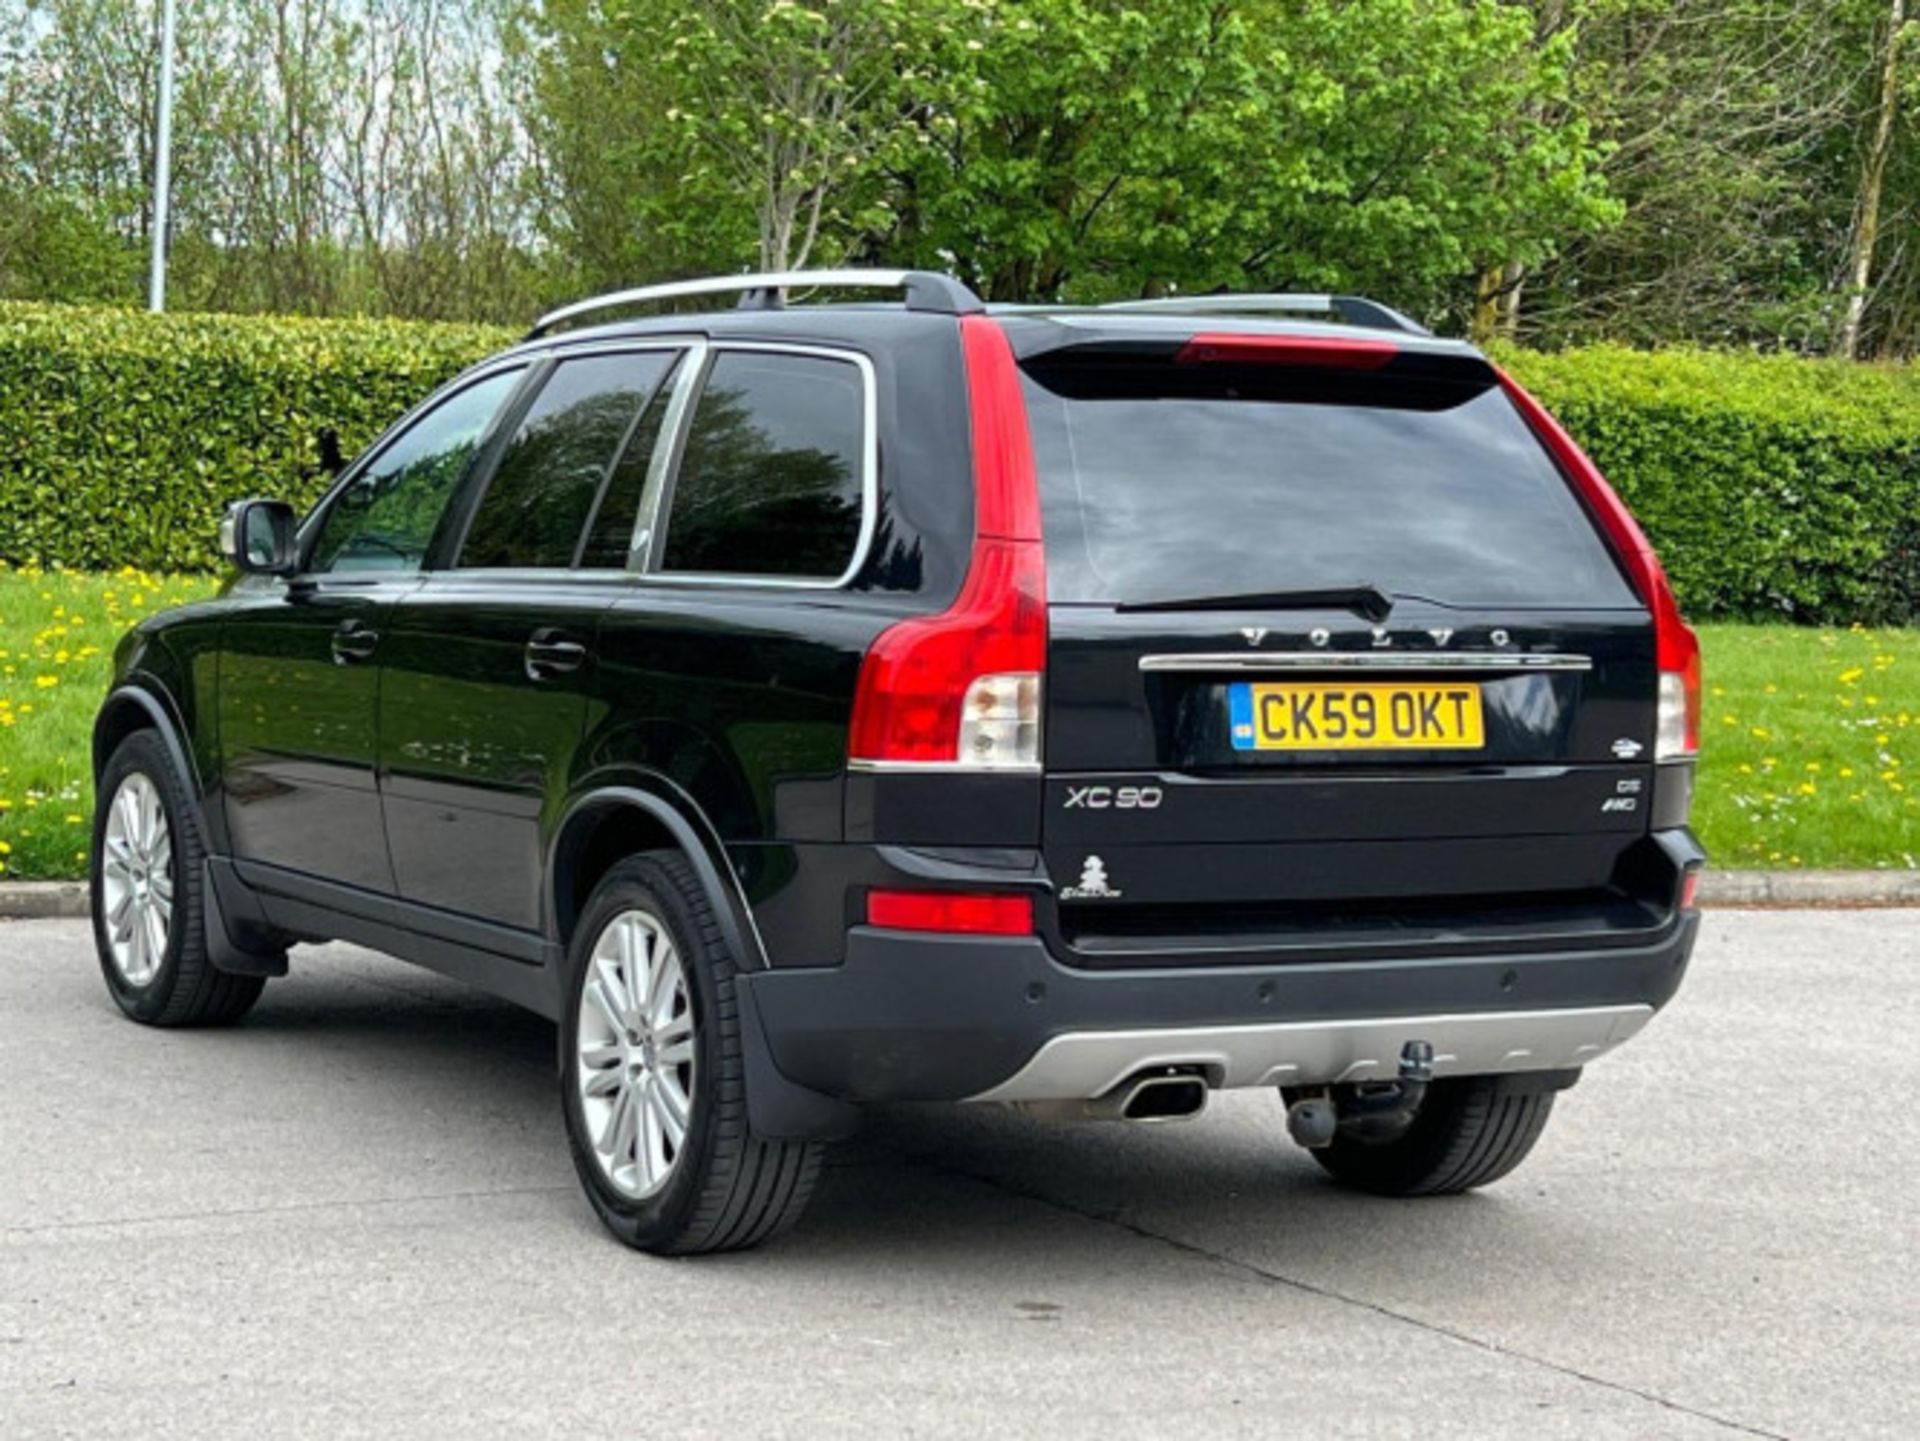 VOLVO XC90 2.4 D5 EXECUTIVE GEARTRONIC AWD, 5DR >>--NO VAT ON HAMMER--<< - Image 4 of 136